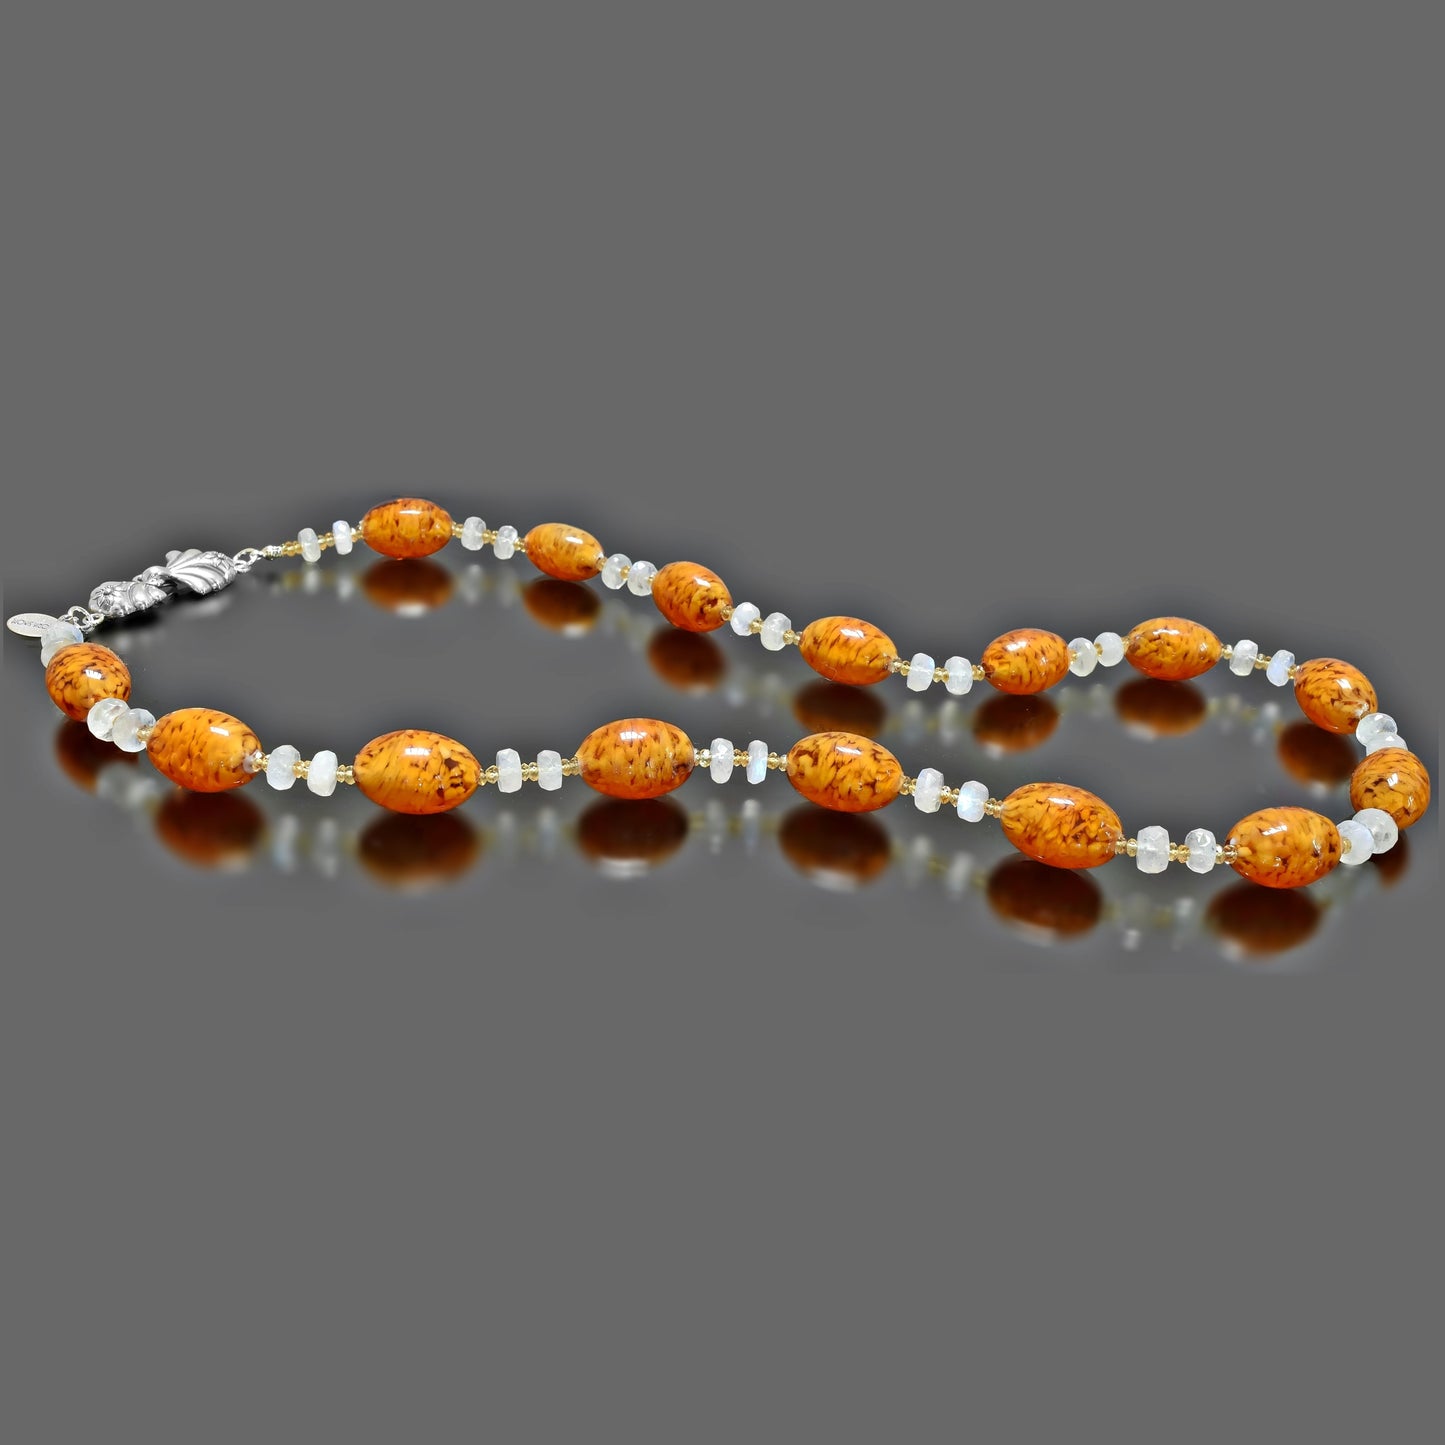 Brown Oval Bead Necklace with Citrine and Moonstone  